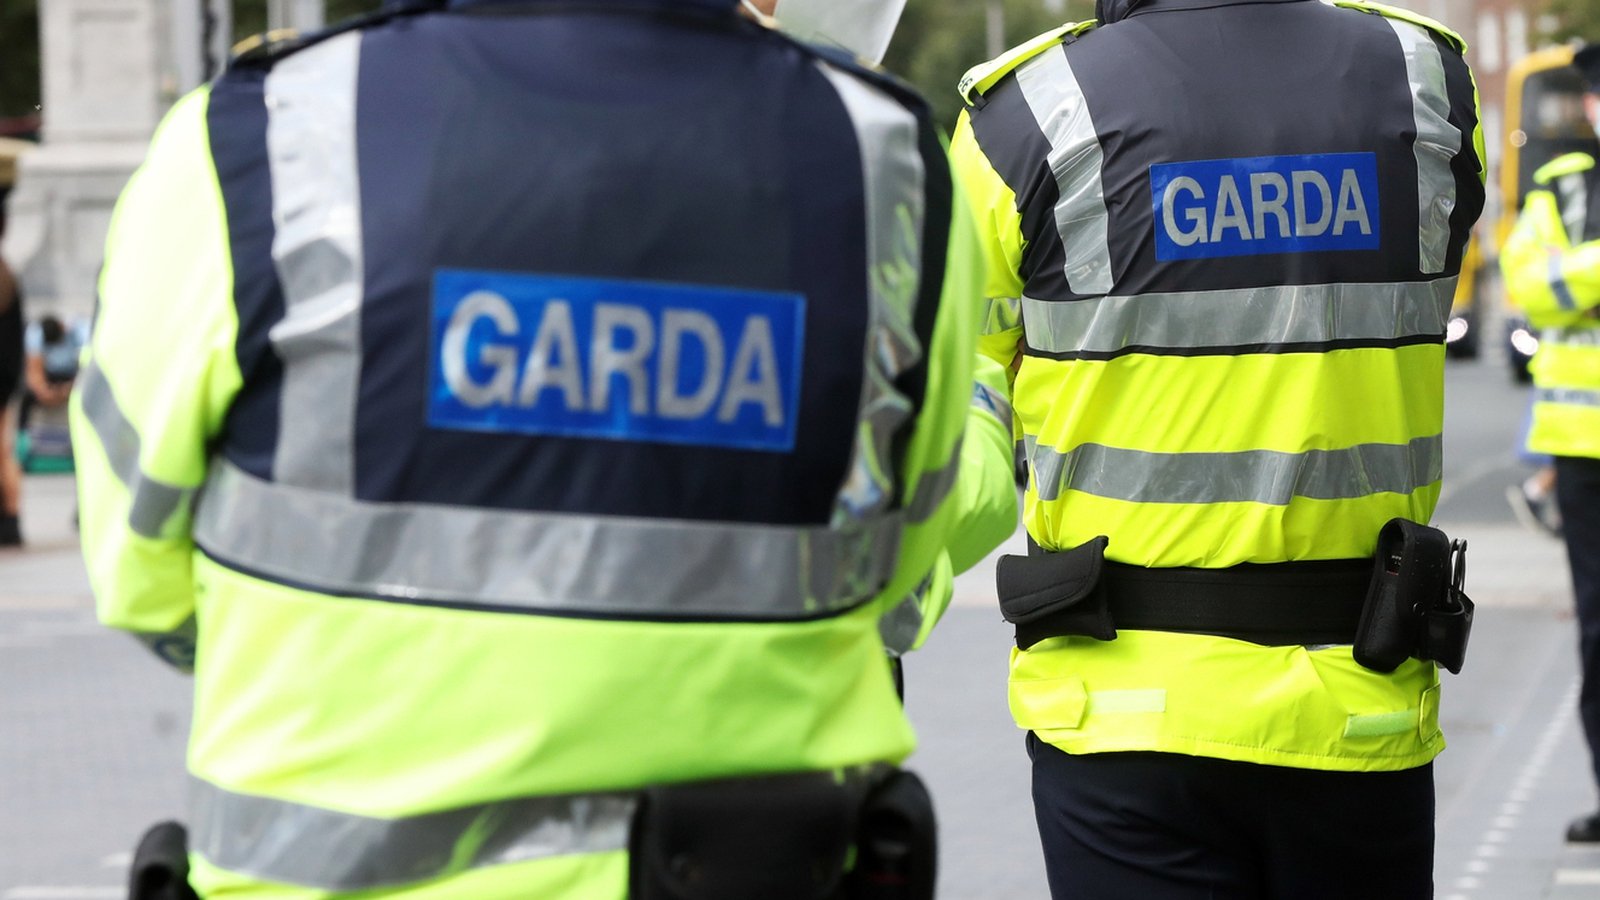 Recruitment drive for new gardaí launched